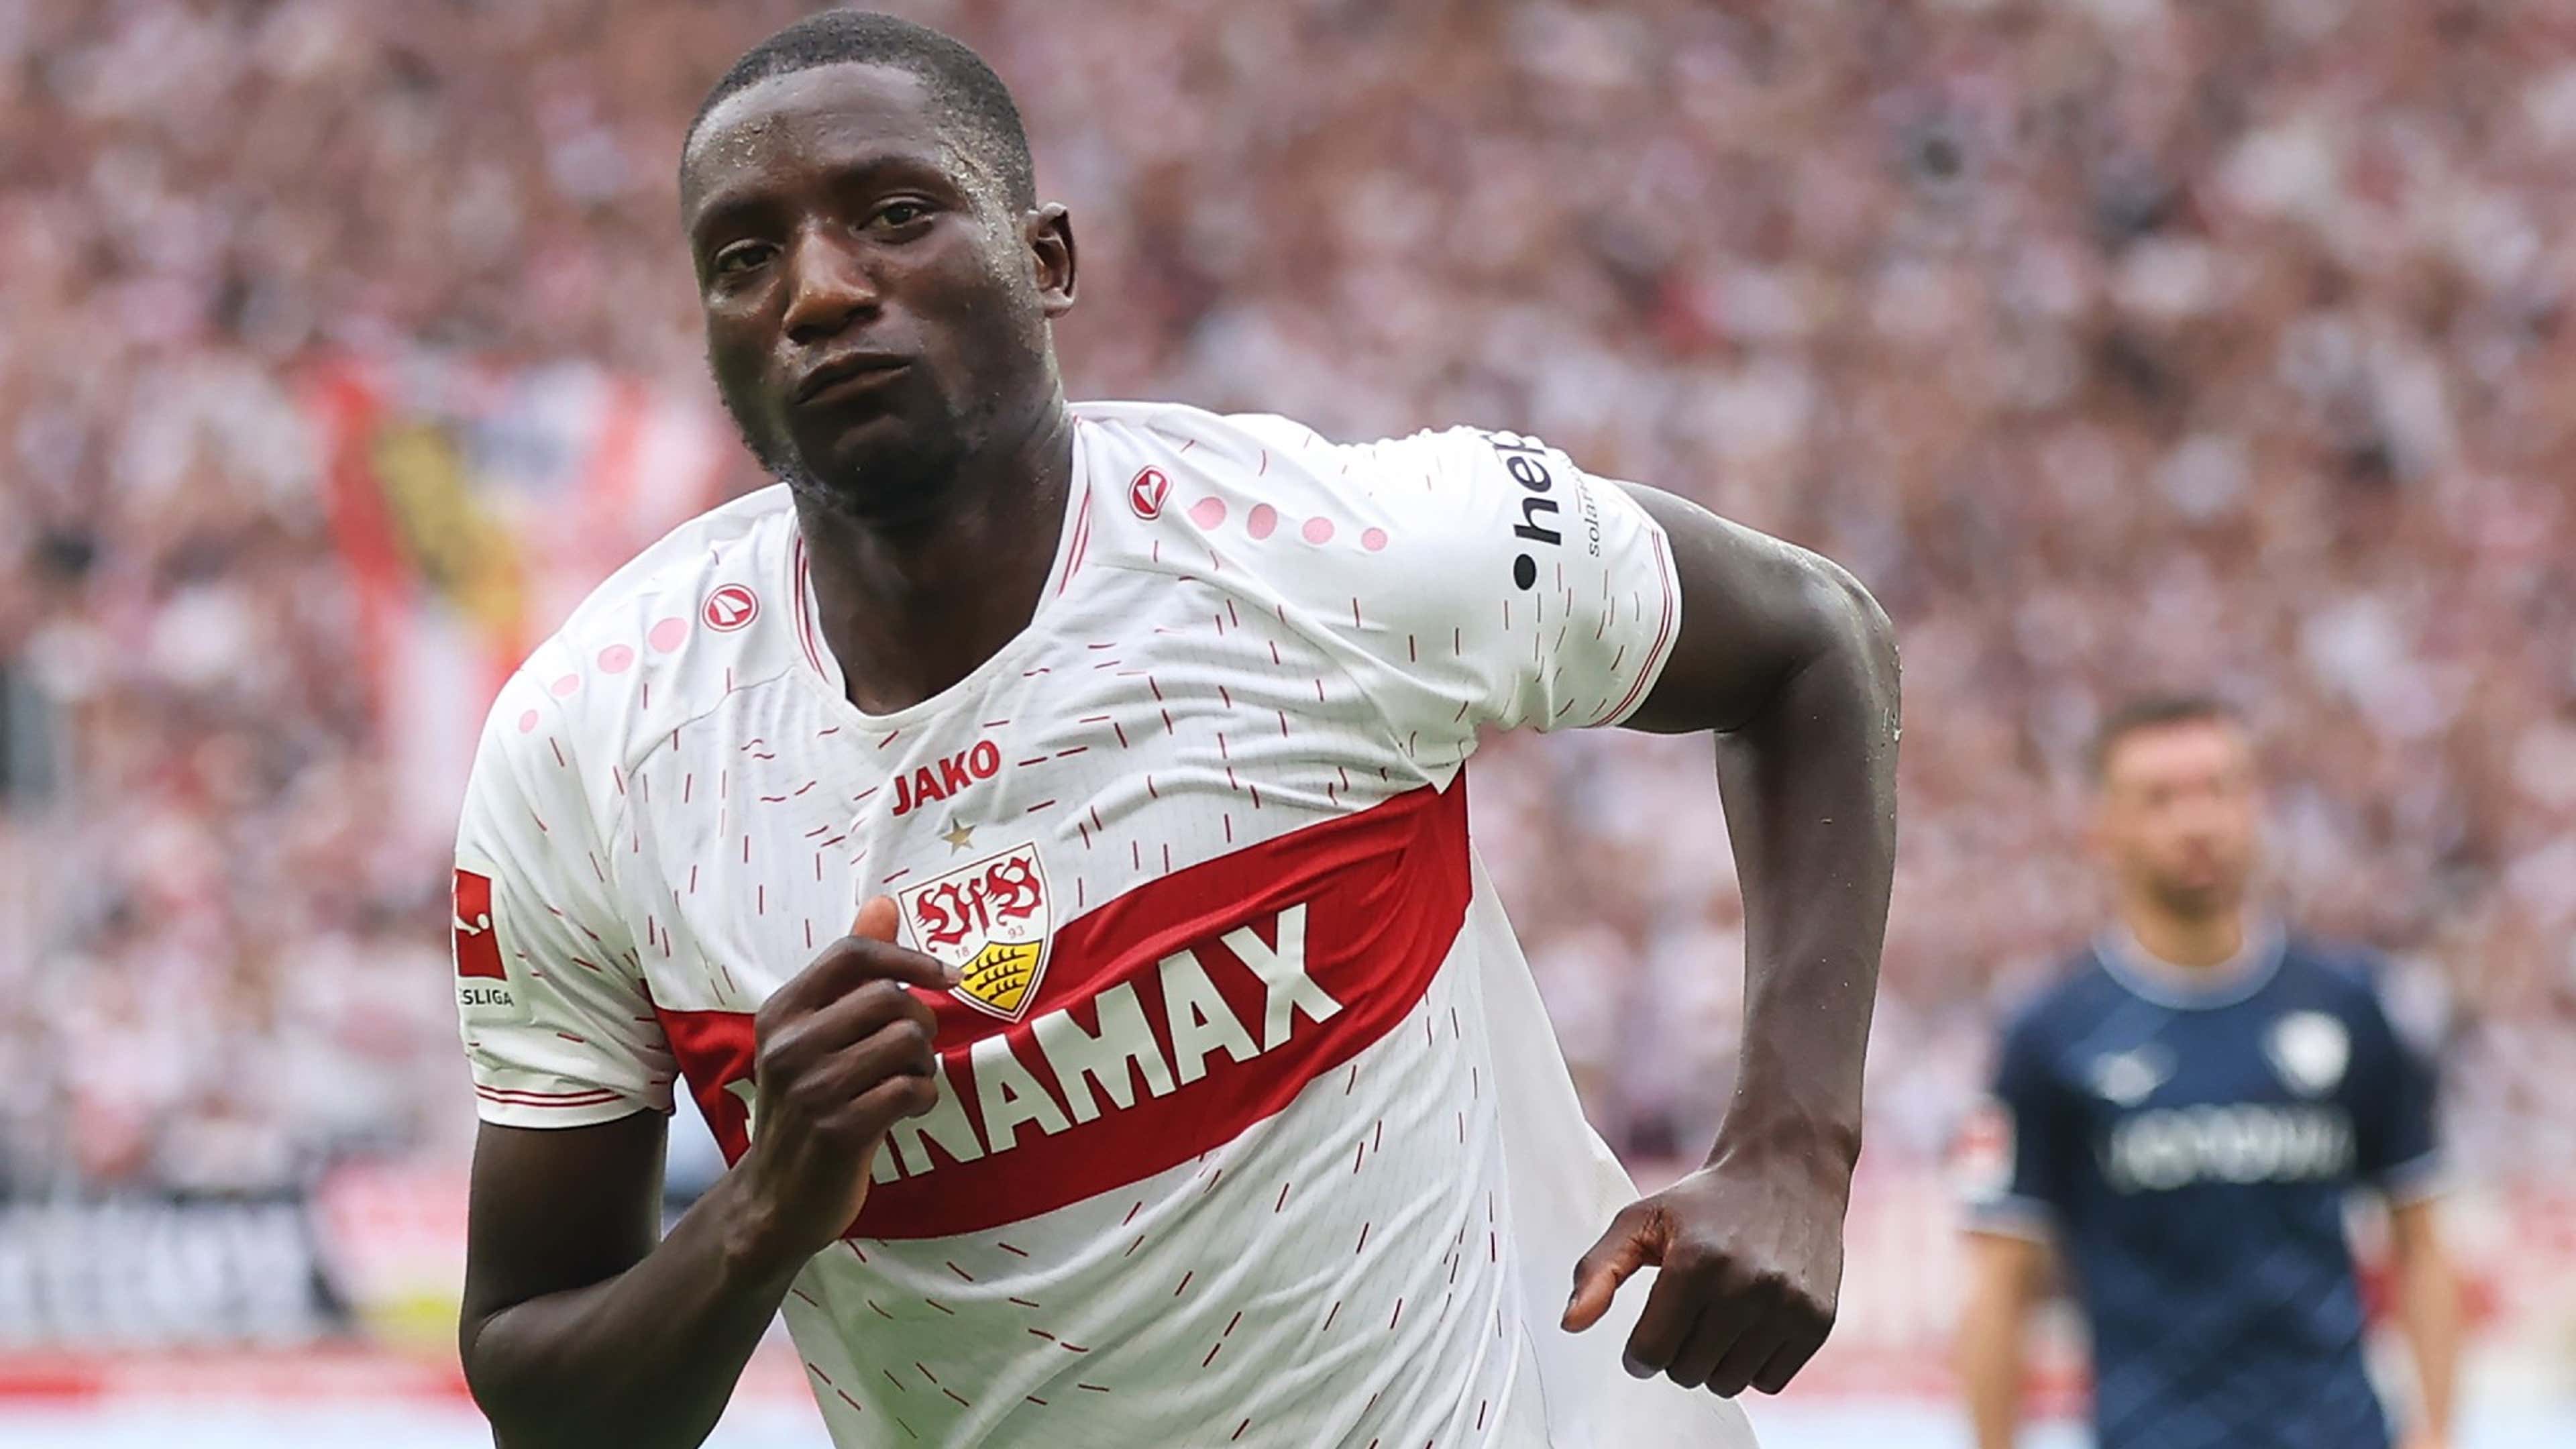  Serhou Guirassy, a professional football player, in a white and red jersey with the word 'JAMAX' on the front, is sprinting during a match.